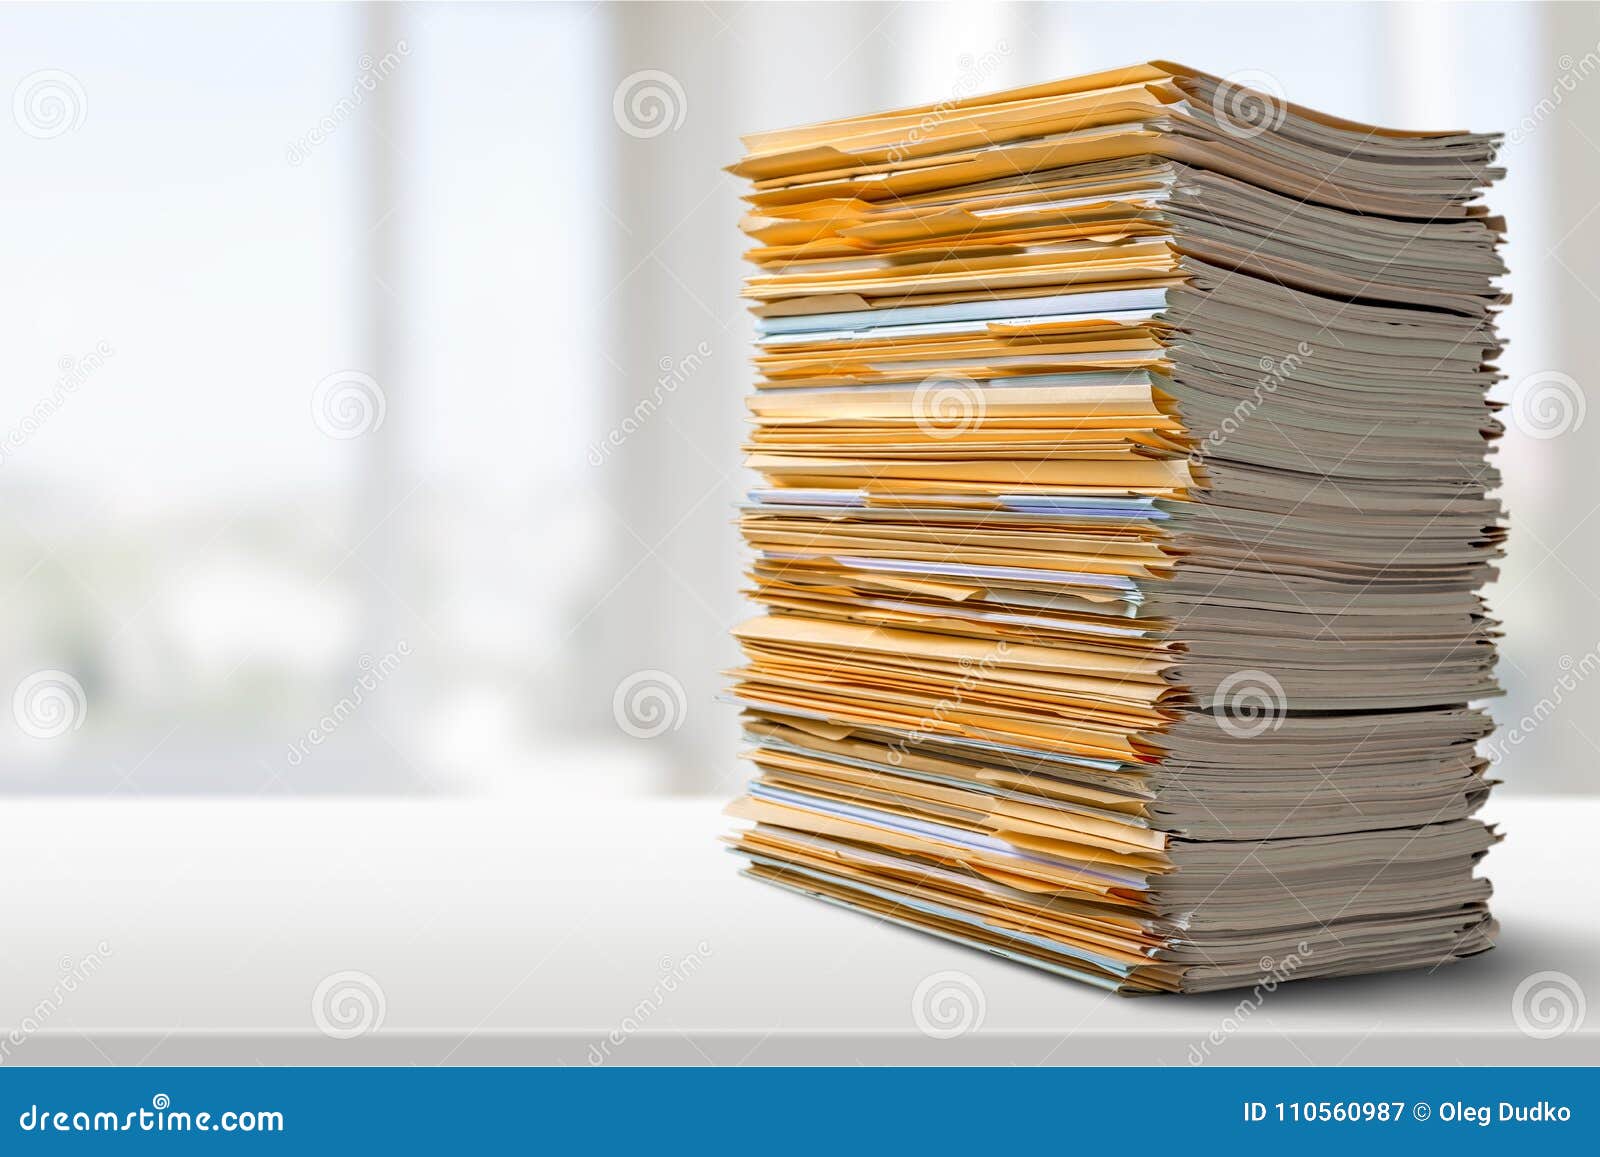 pile of files in folders on light background